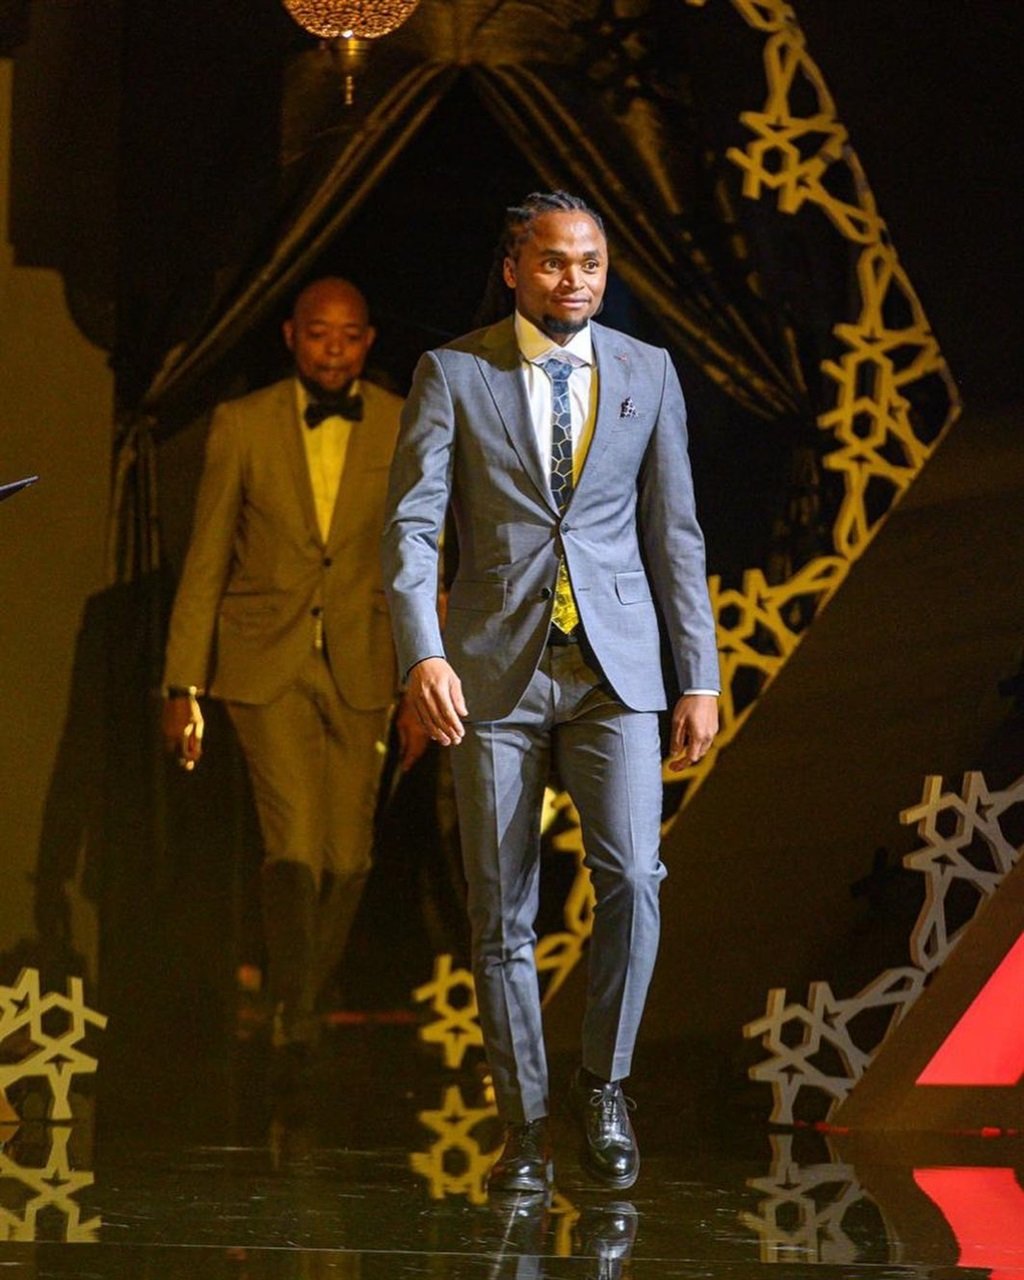 Siphiwe Tshabalala revealed the staggeringly low amount he received for his first salary.